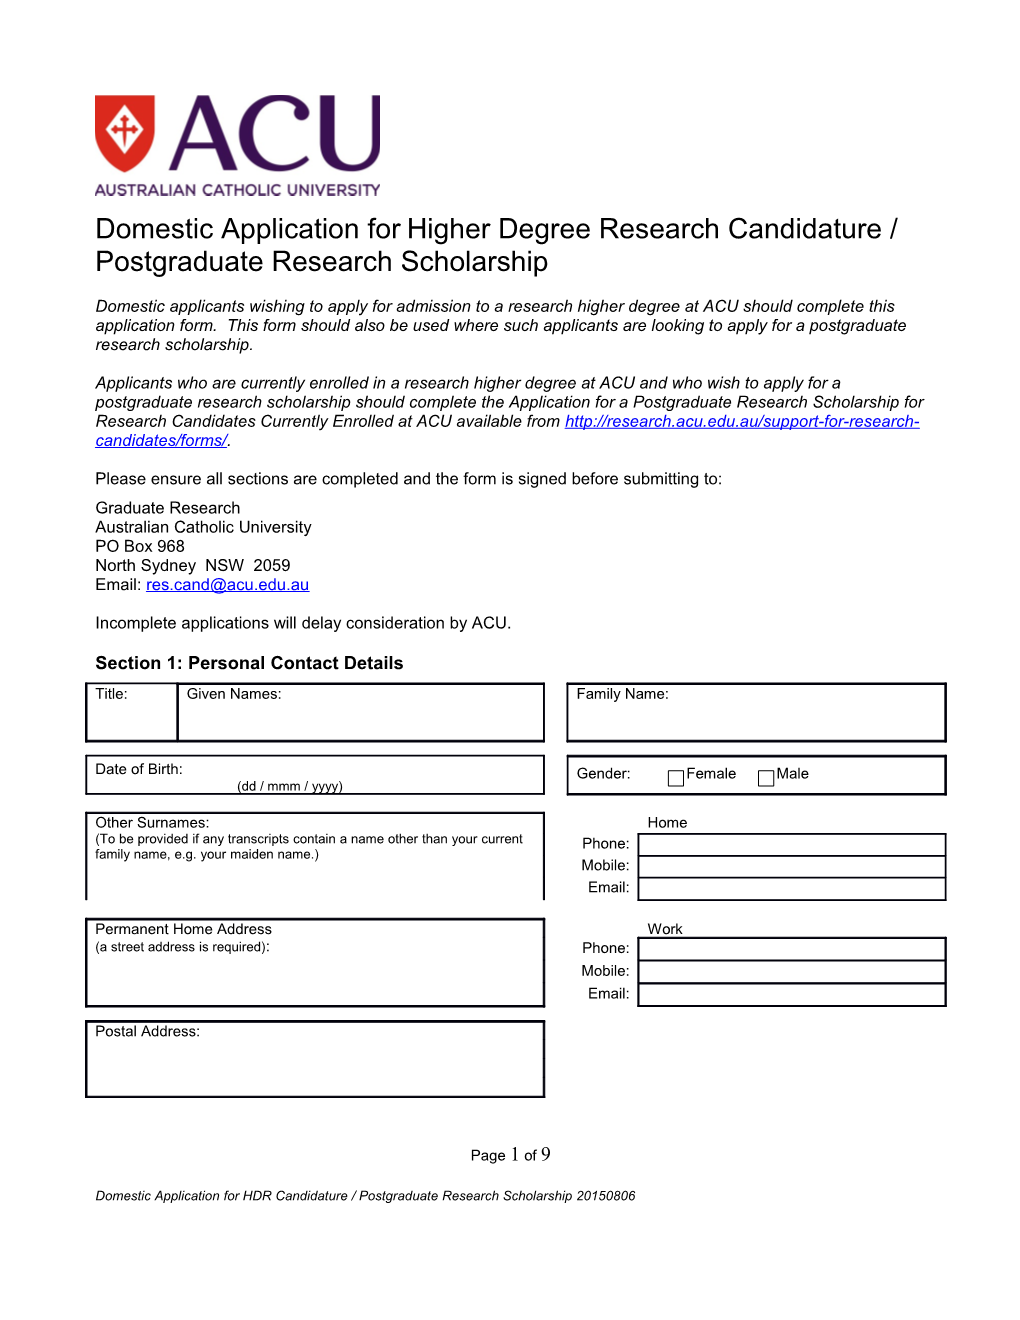 Domestic Application Forhigher Degree Research Candidature/Postgraduate Research Scholarship